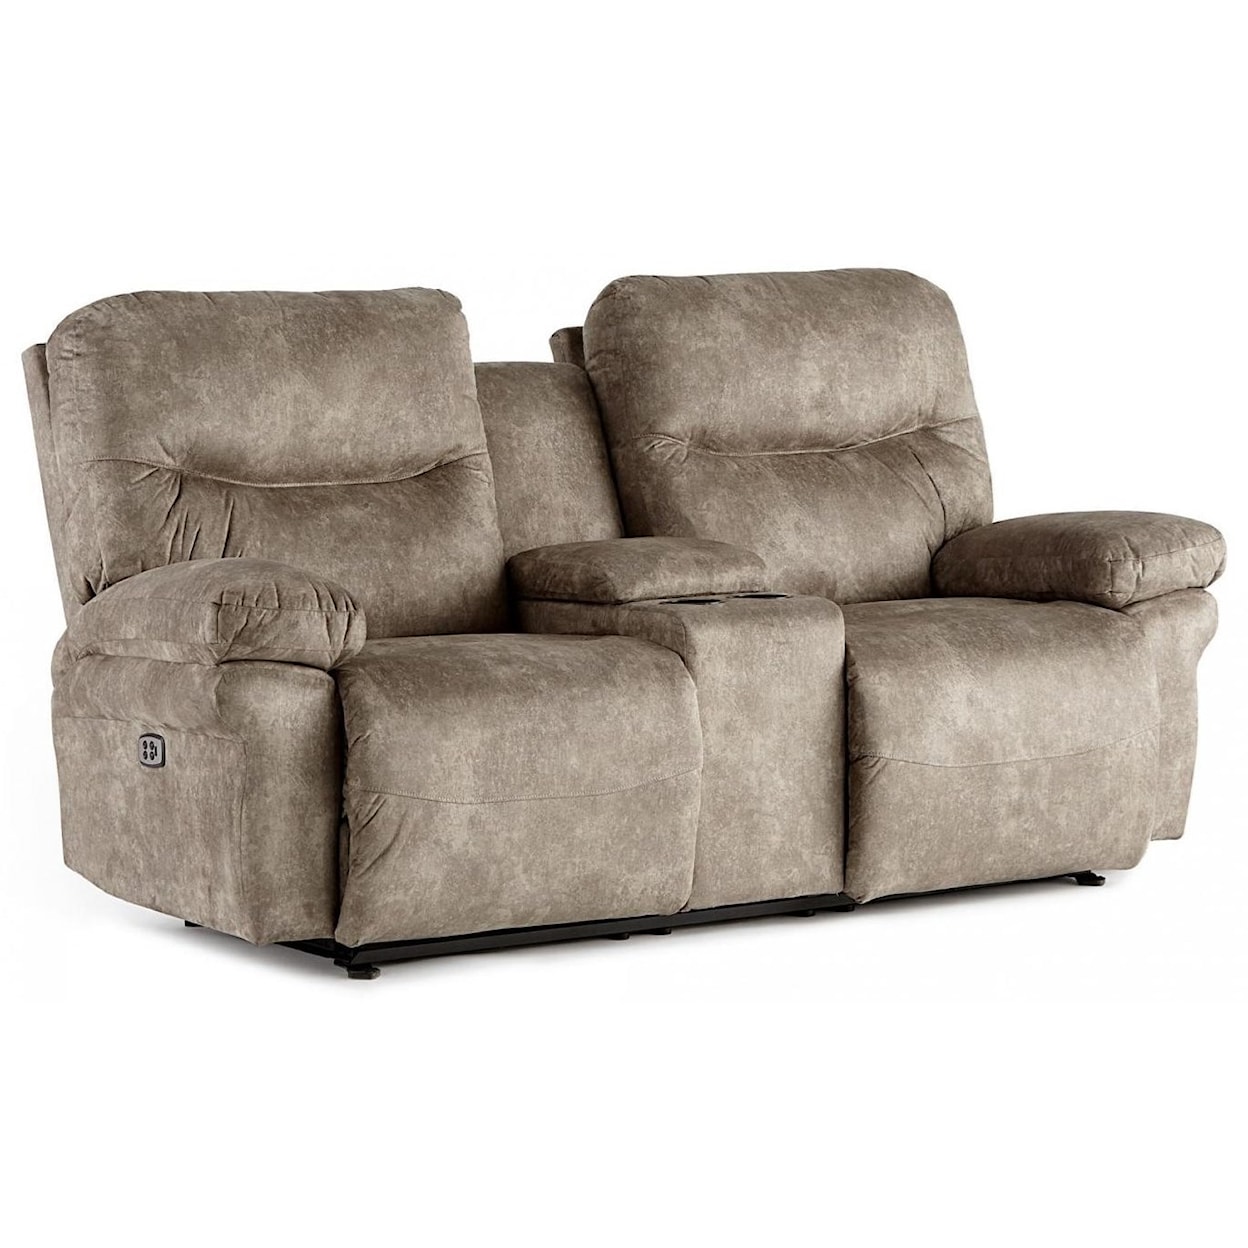 Bravo Furniture Leya Power Space Saver Loveseat with Console